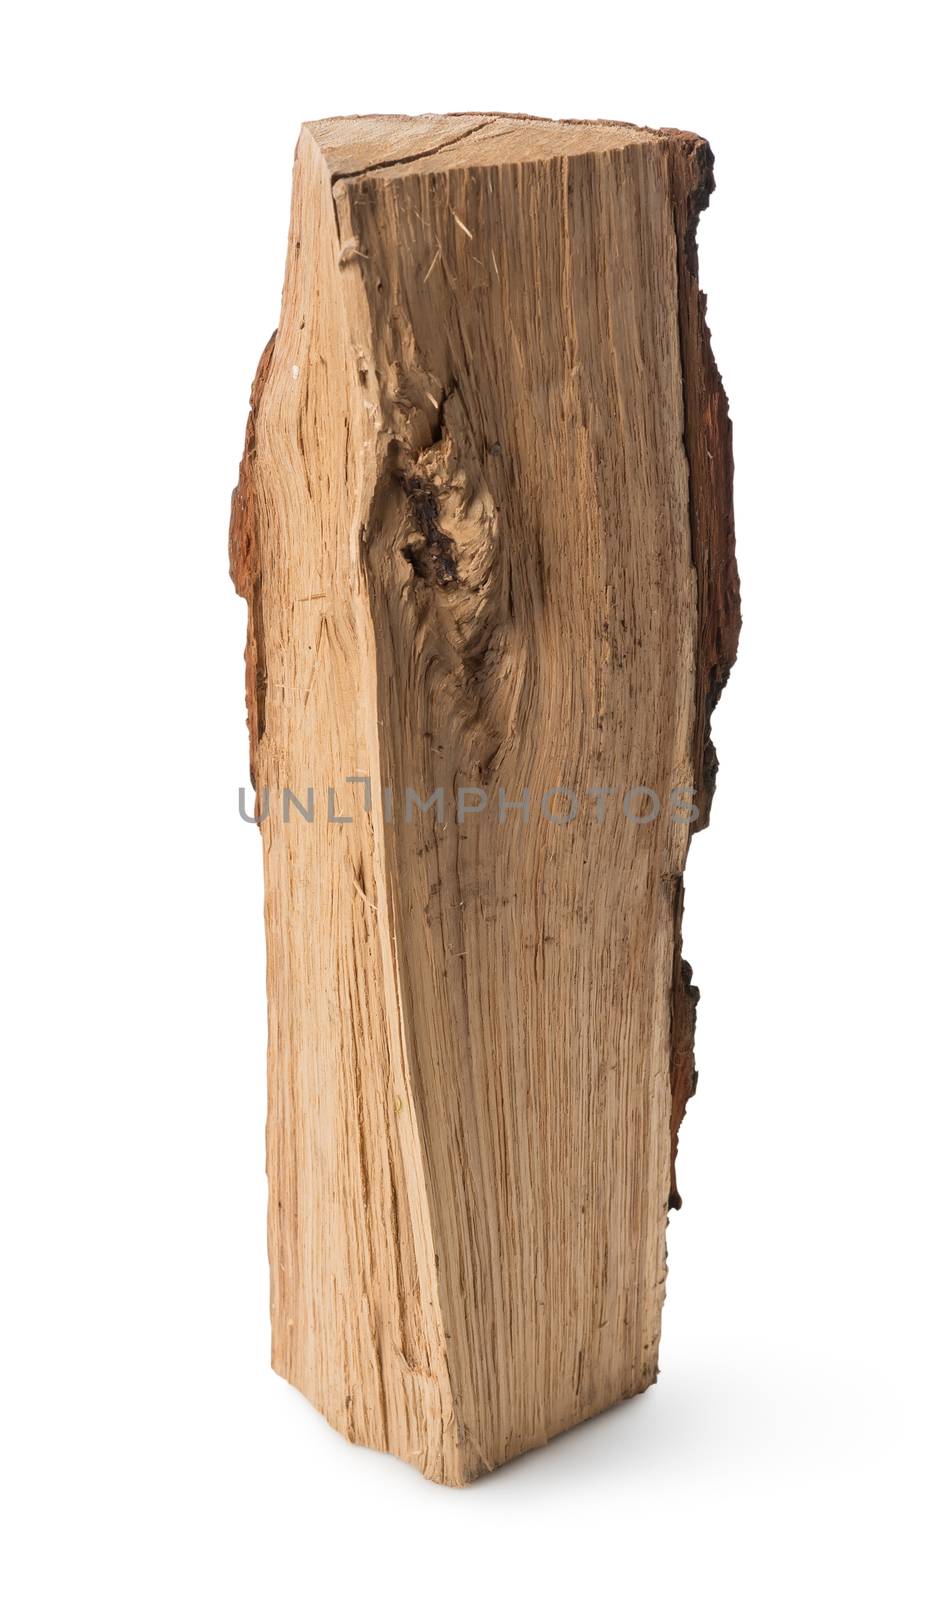 Standing stump isolated on a white background